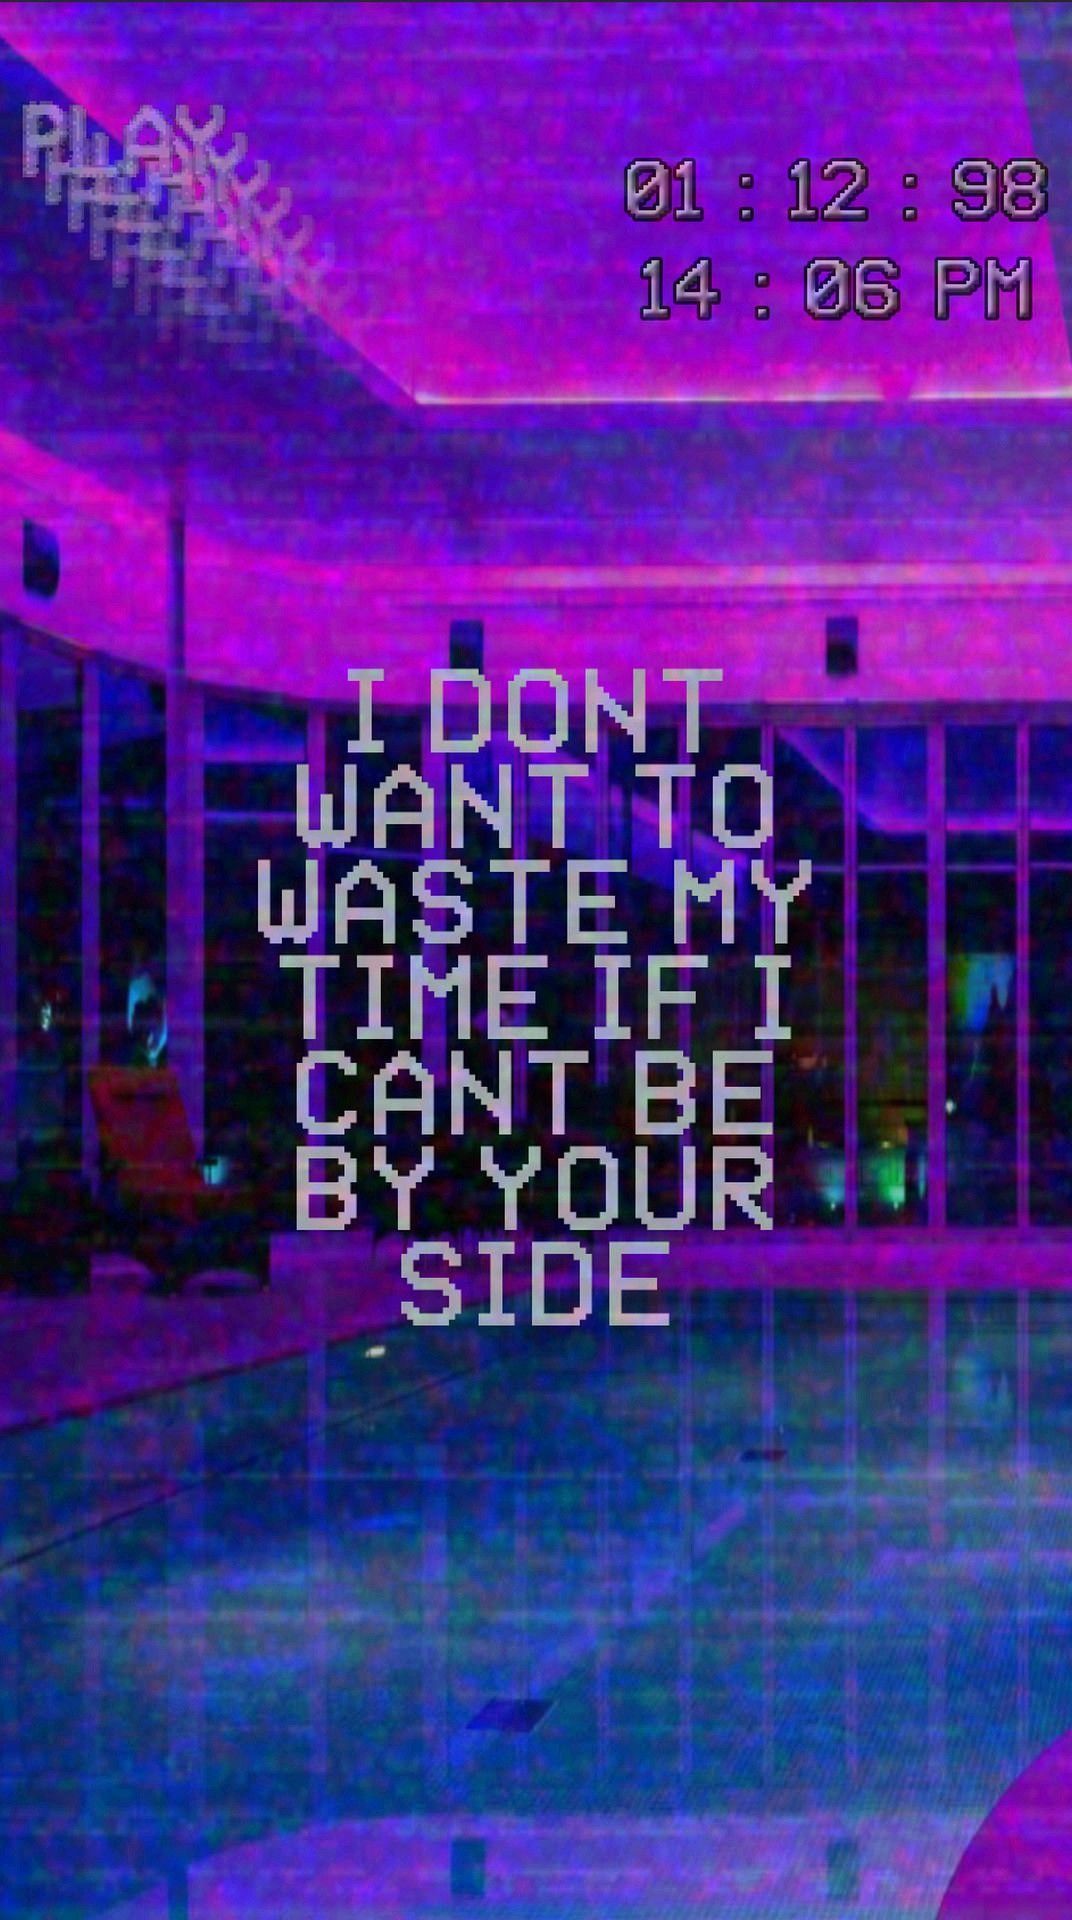 Quote aesthetic image by Lil Intro Vert on ＡＥＳＴＨＥＴＩＣ